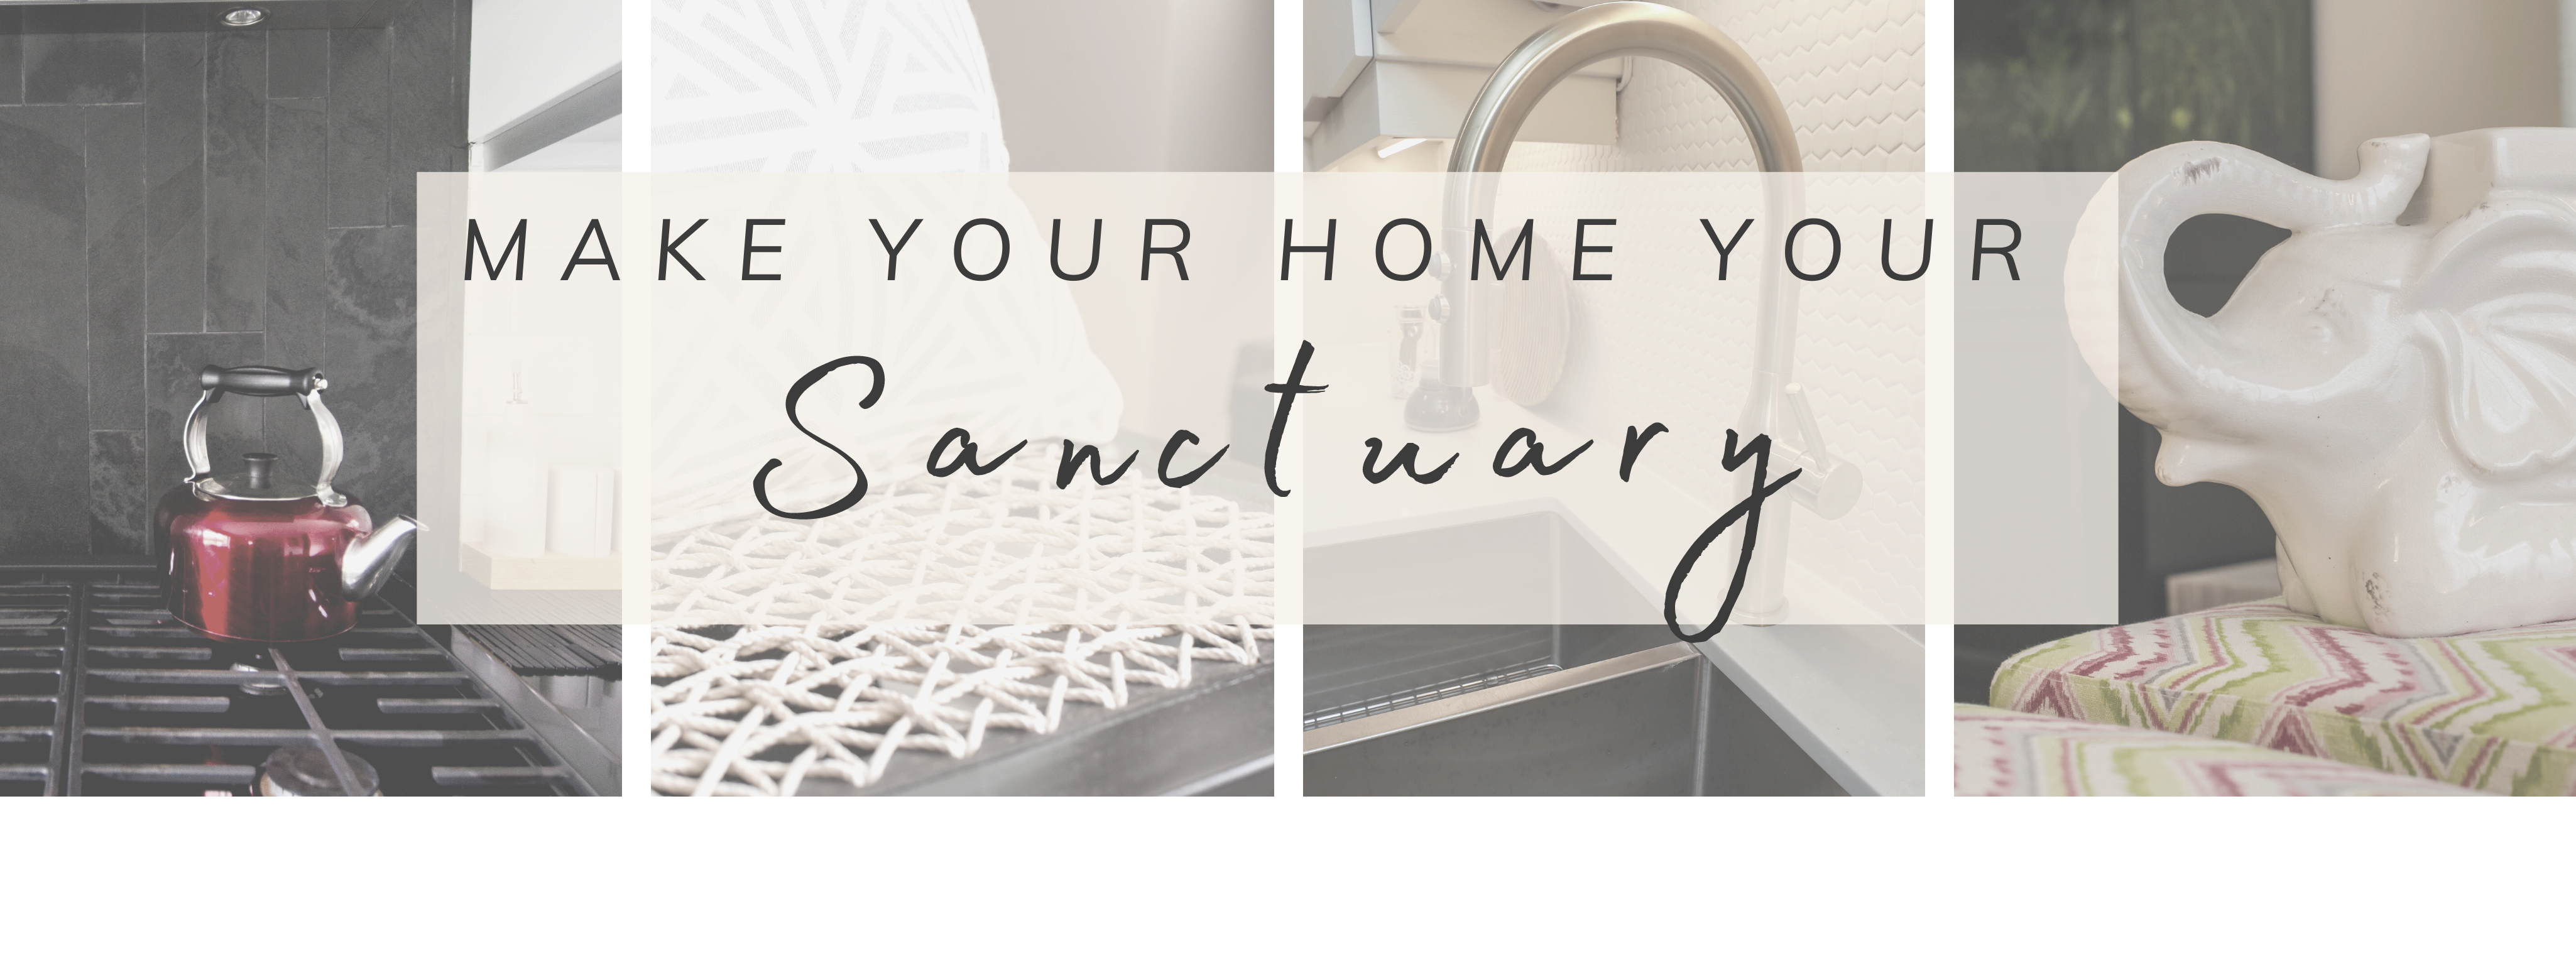 Make your home a sanctuary